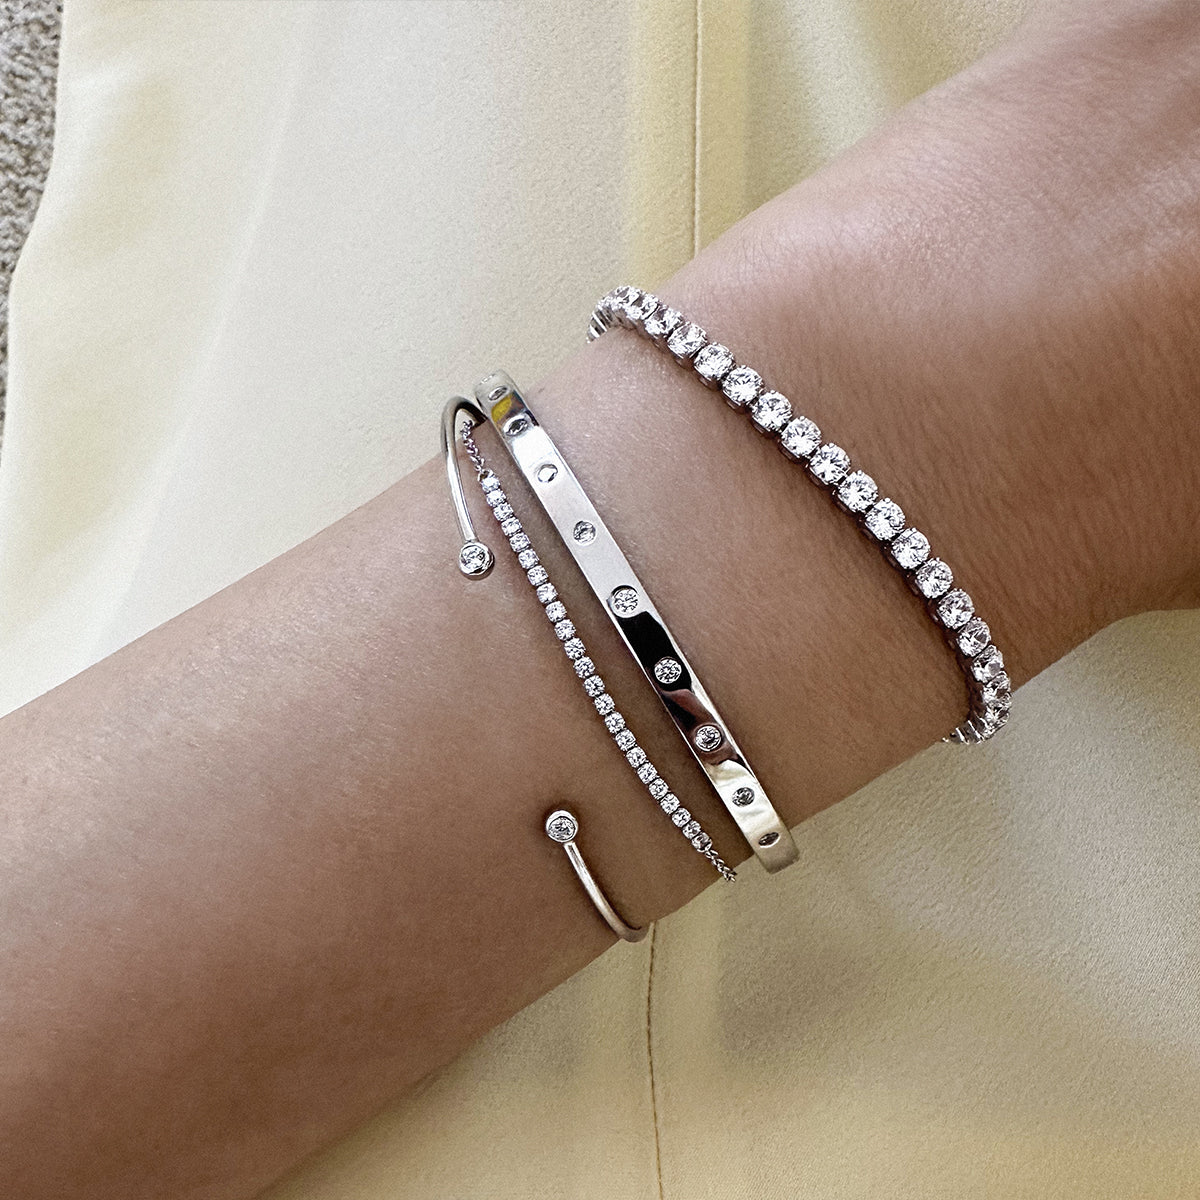 Thin Tennis Chain Bracelet Silver Plated